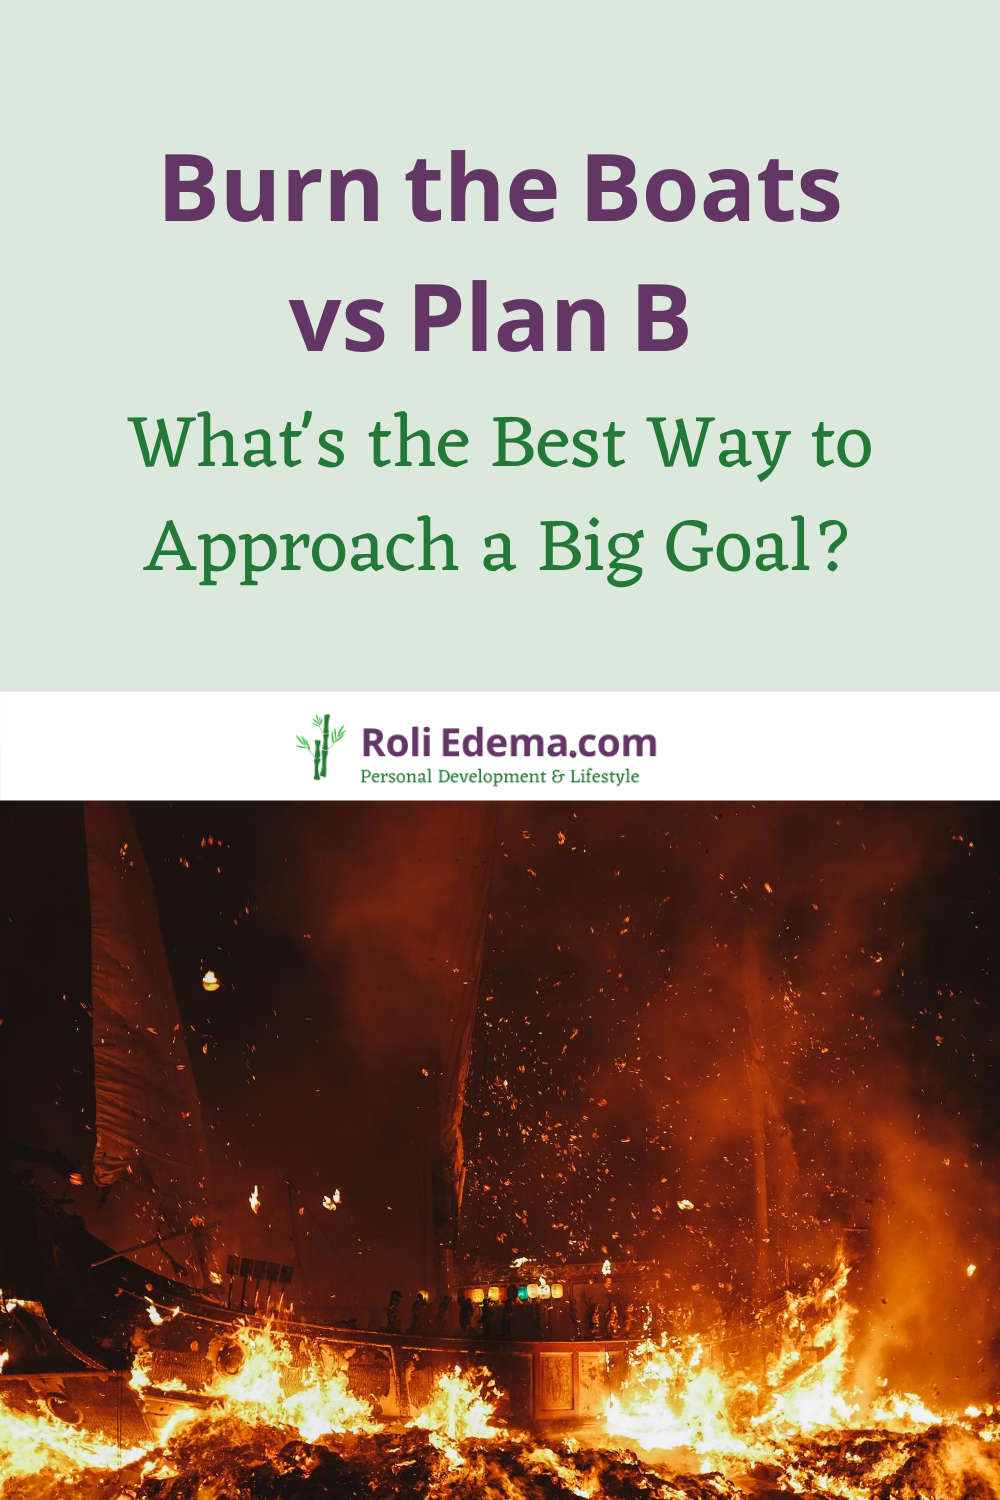 Burn the Boats vs Plan B - What's the Best Way to Approach a Big Goal?